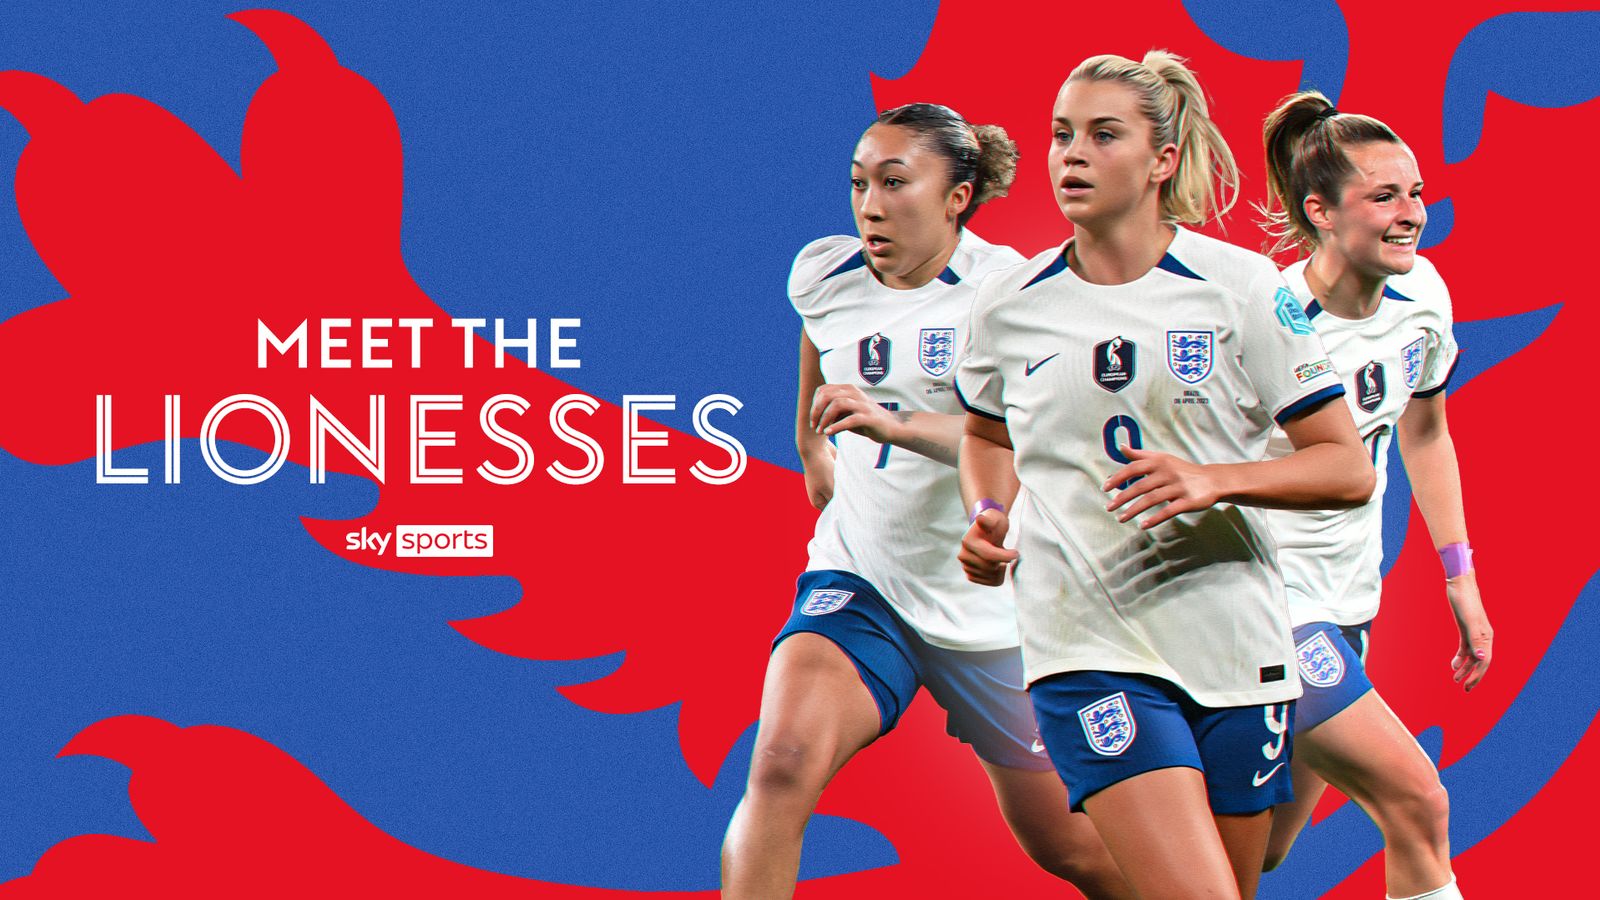 Women's World Cup final Meet the Lionesses ahead of Spain vs England